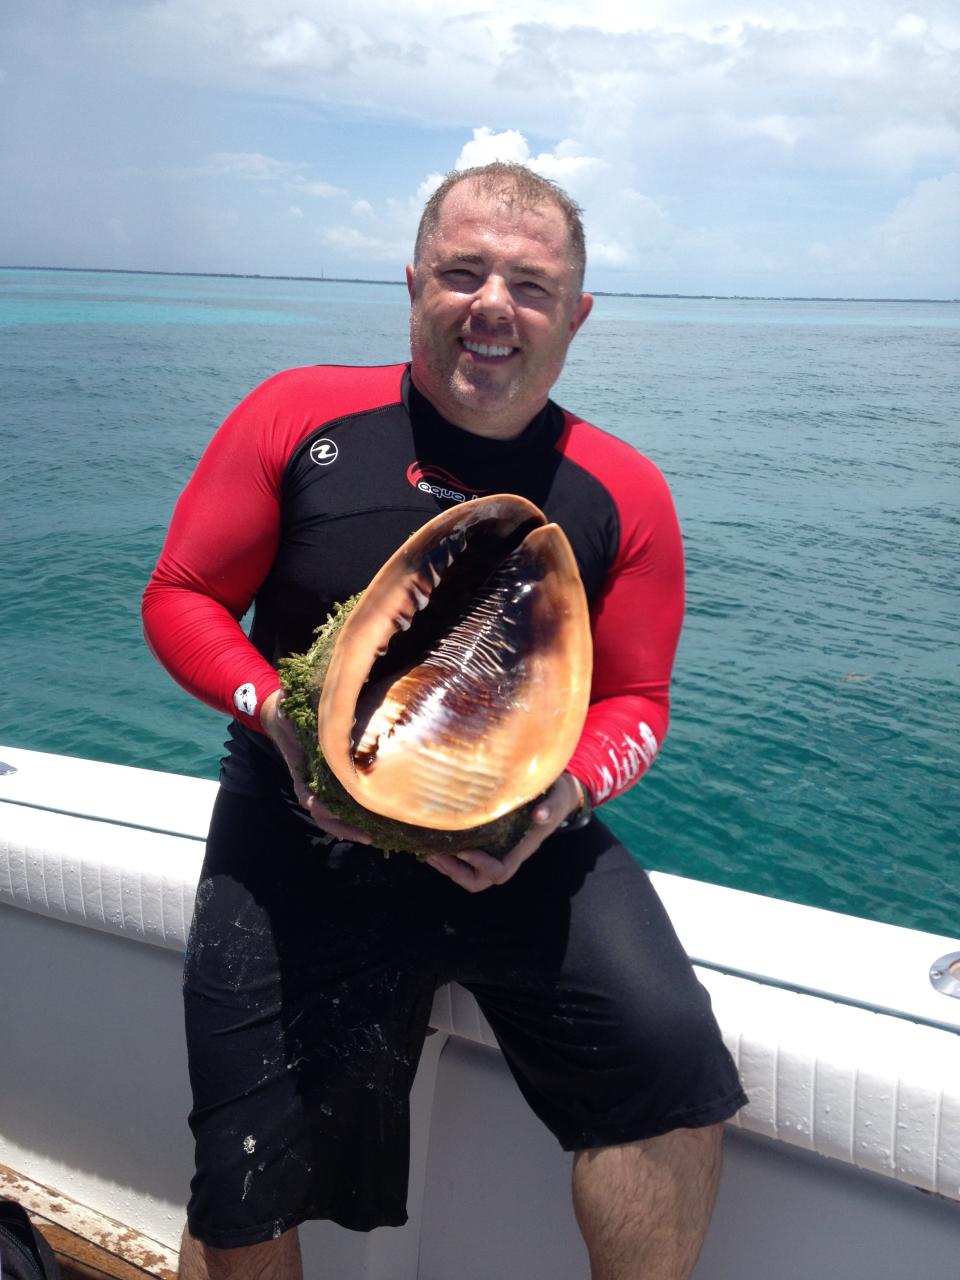 Mark Johnson of Wilmington shows off a Queen's Helmet he found while scuba diving off the Florida Keys. Johnson, president of the North Carolina Shell Club, said he's found Queen's Helmet shells off the coast of North Carolina, as well.